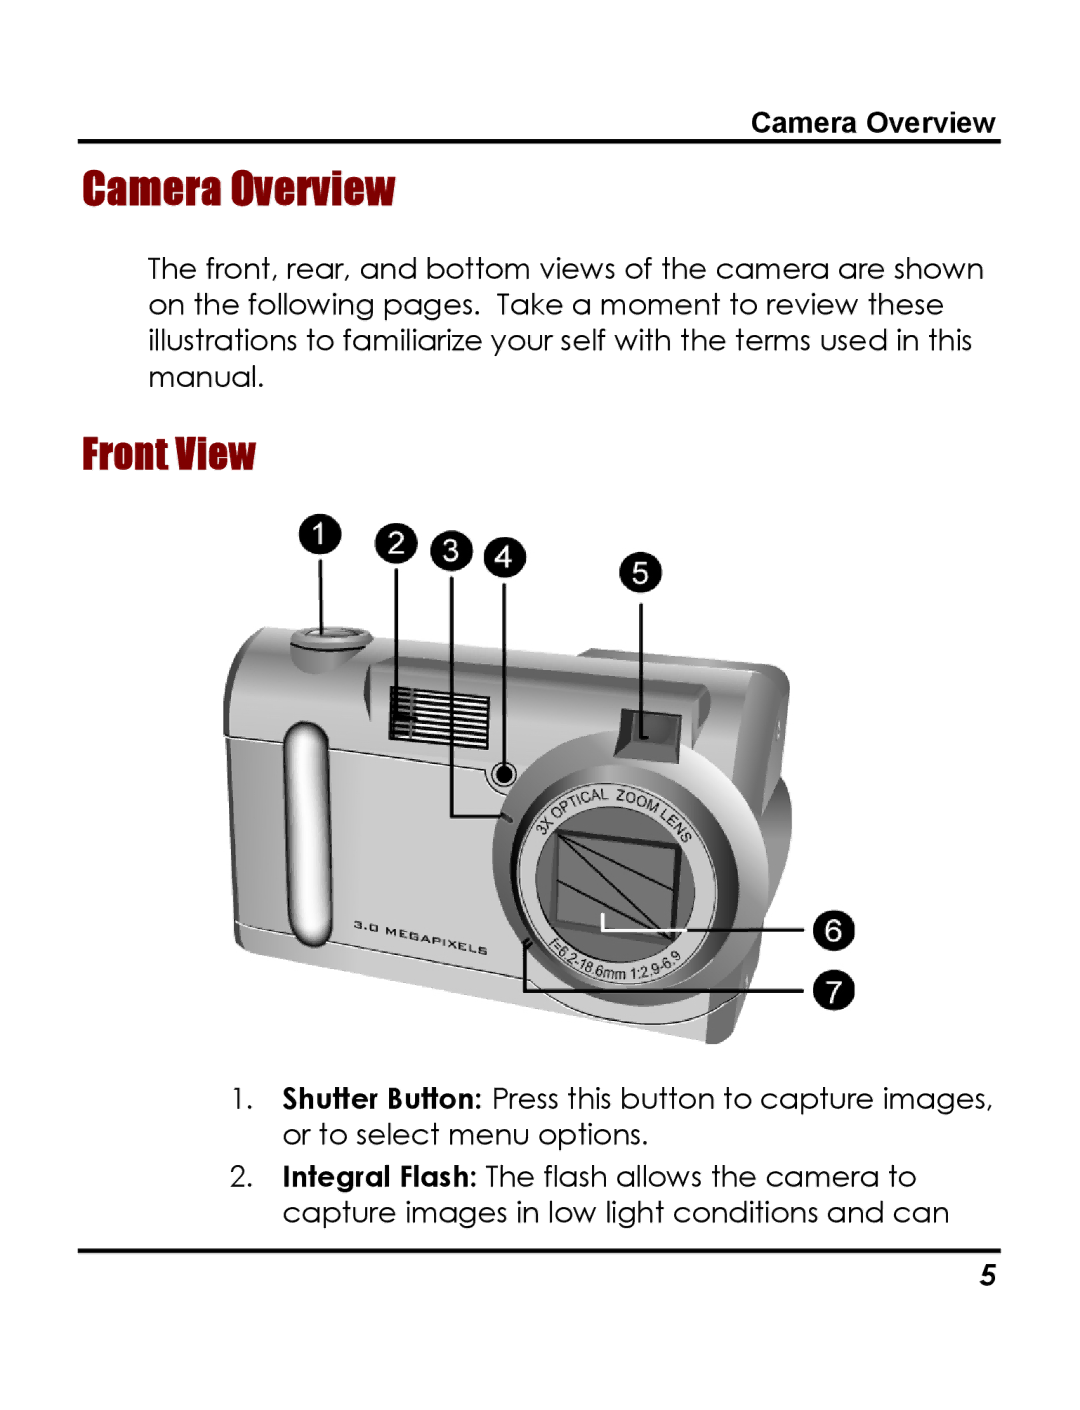 Vivitar 3765 instruction manual Camera Overview, Front View 